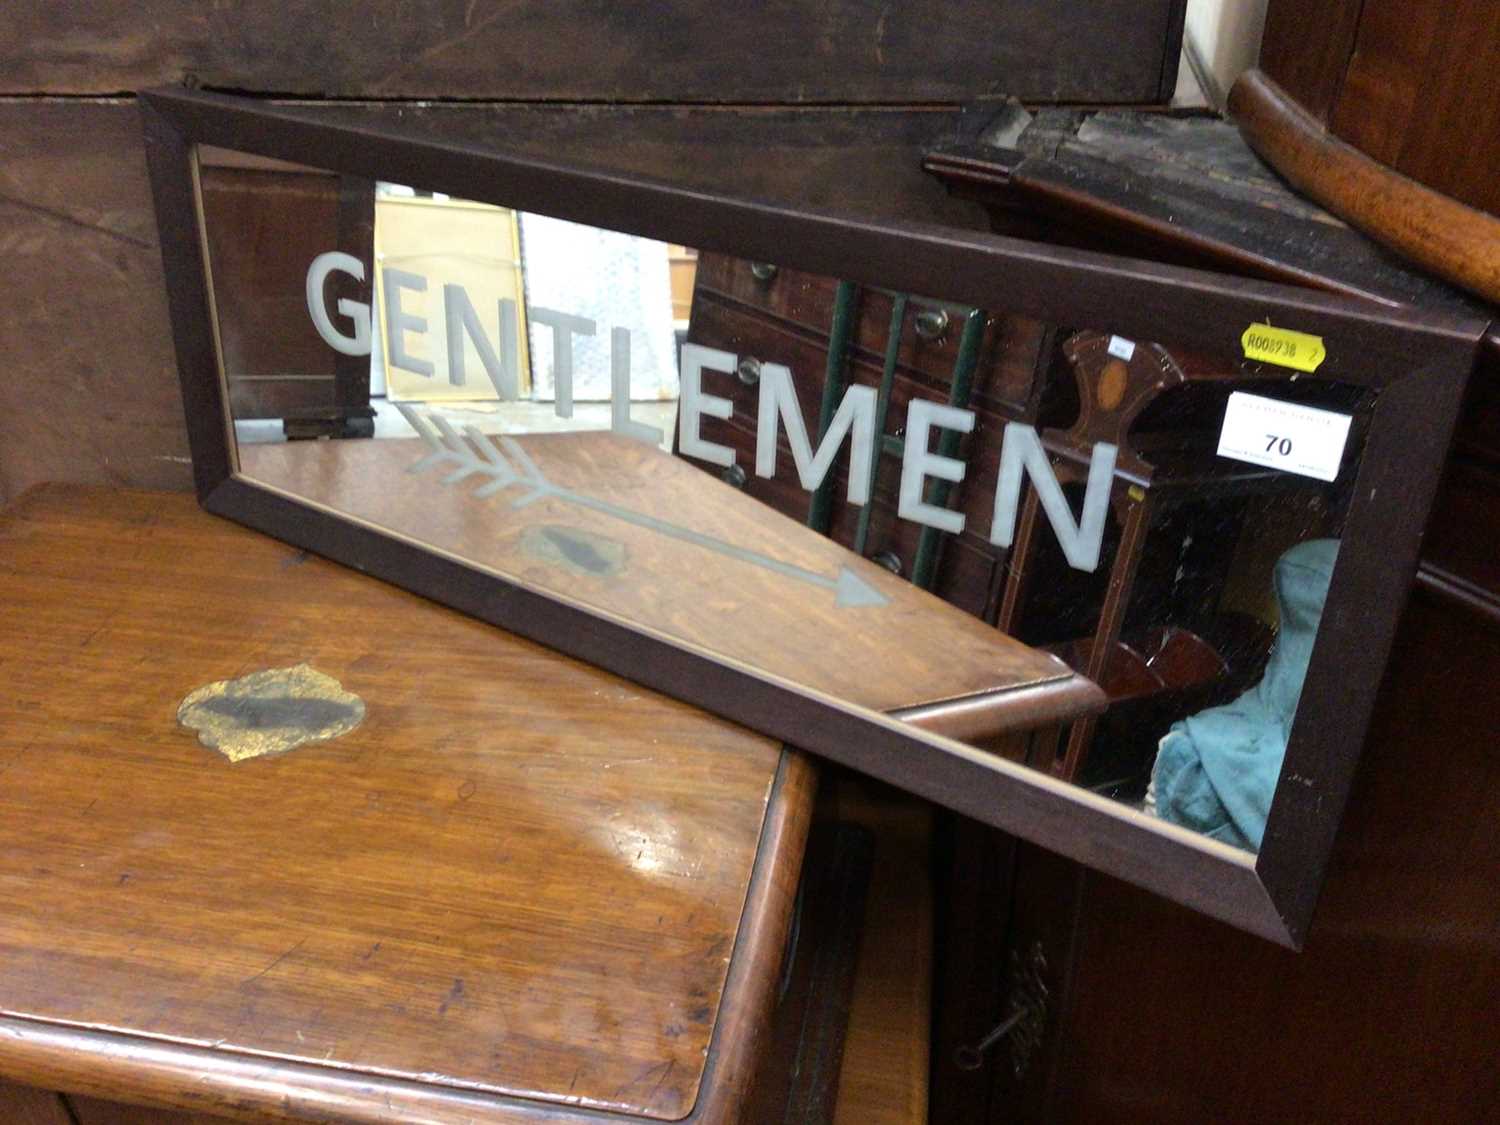 Lot 70 - Etched mirrored glass railway style Gentleman's lavatory sign in wooden frame